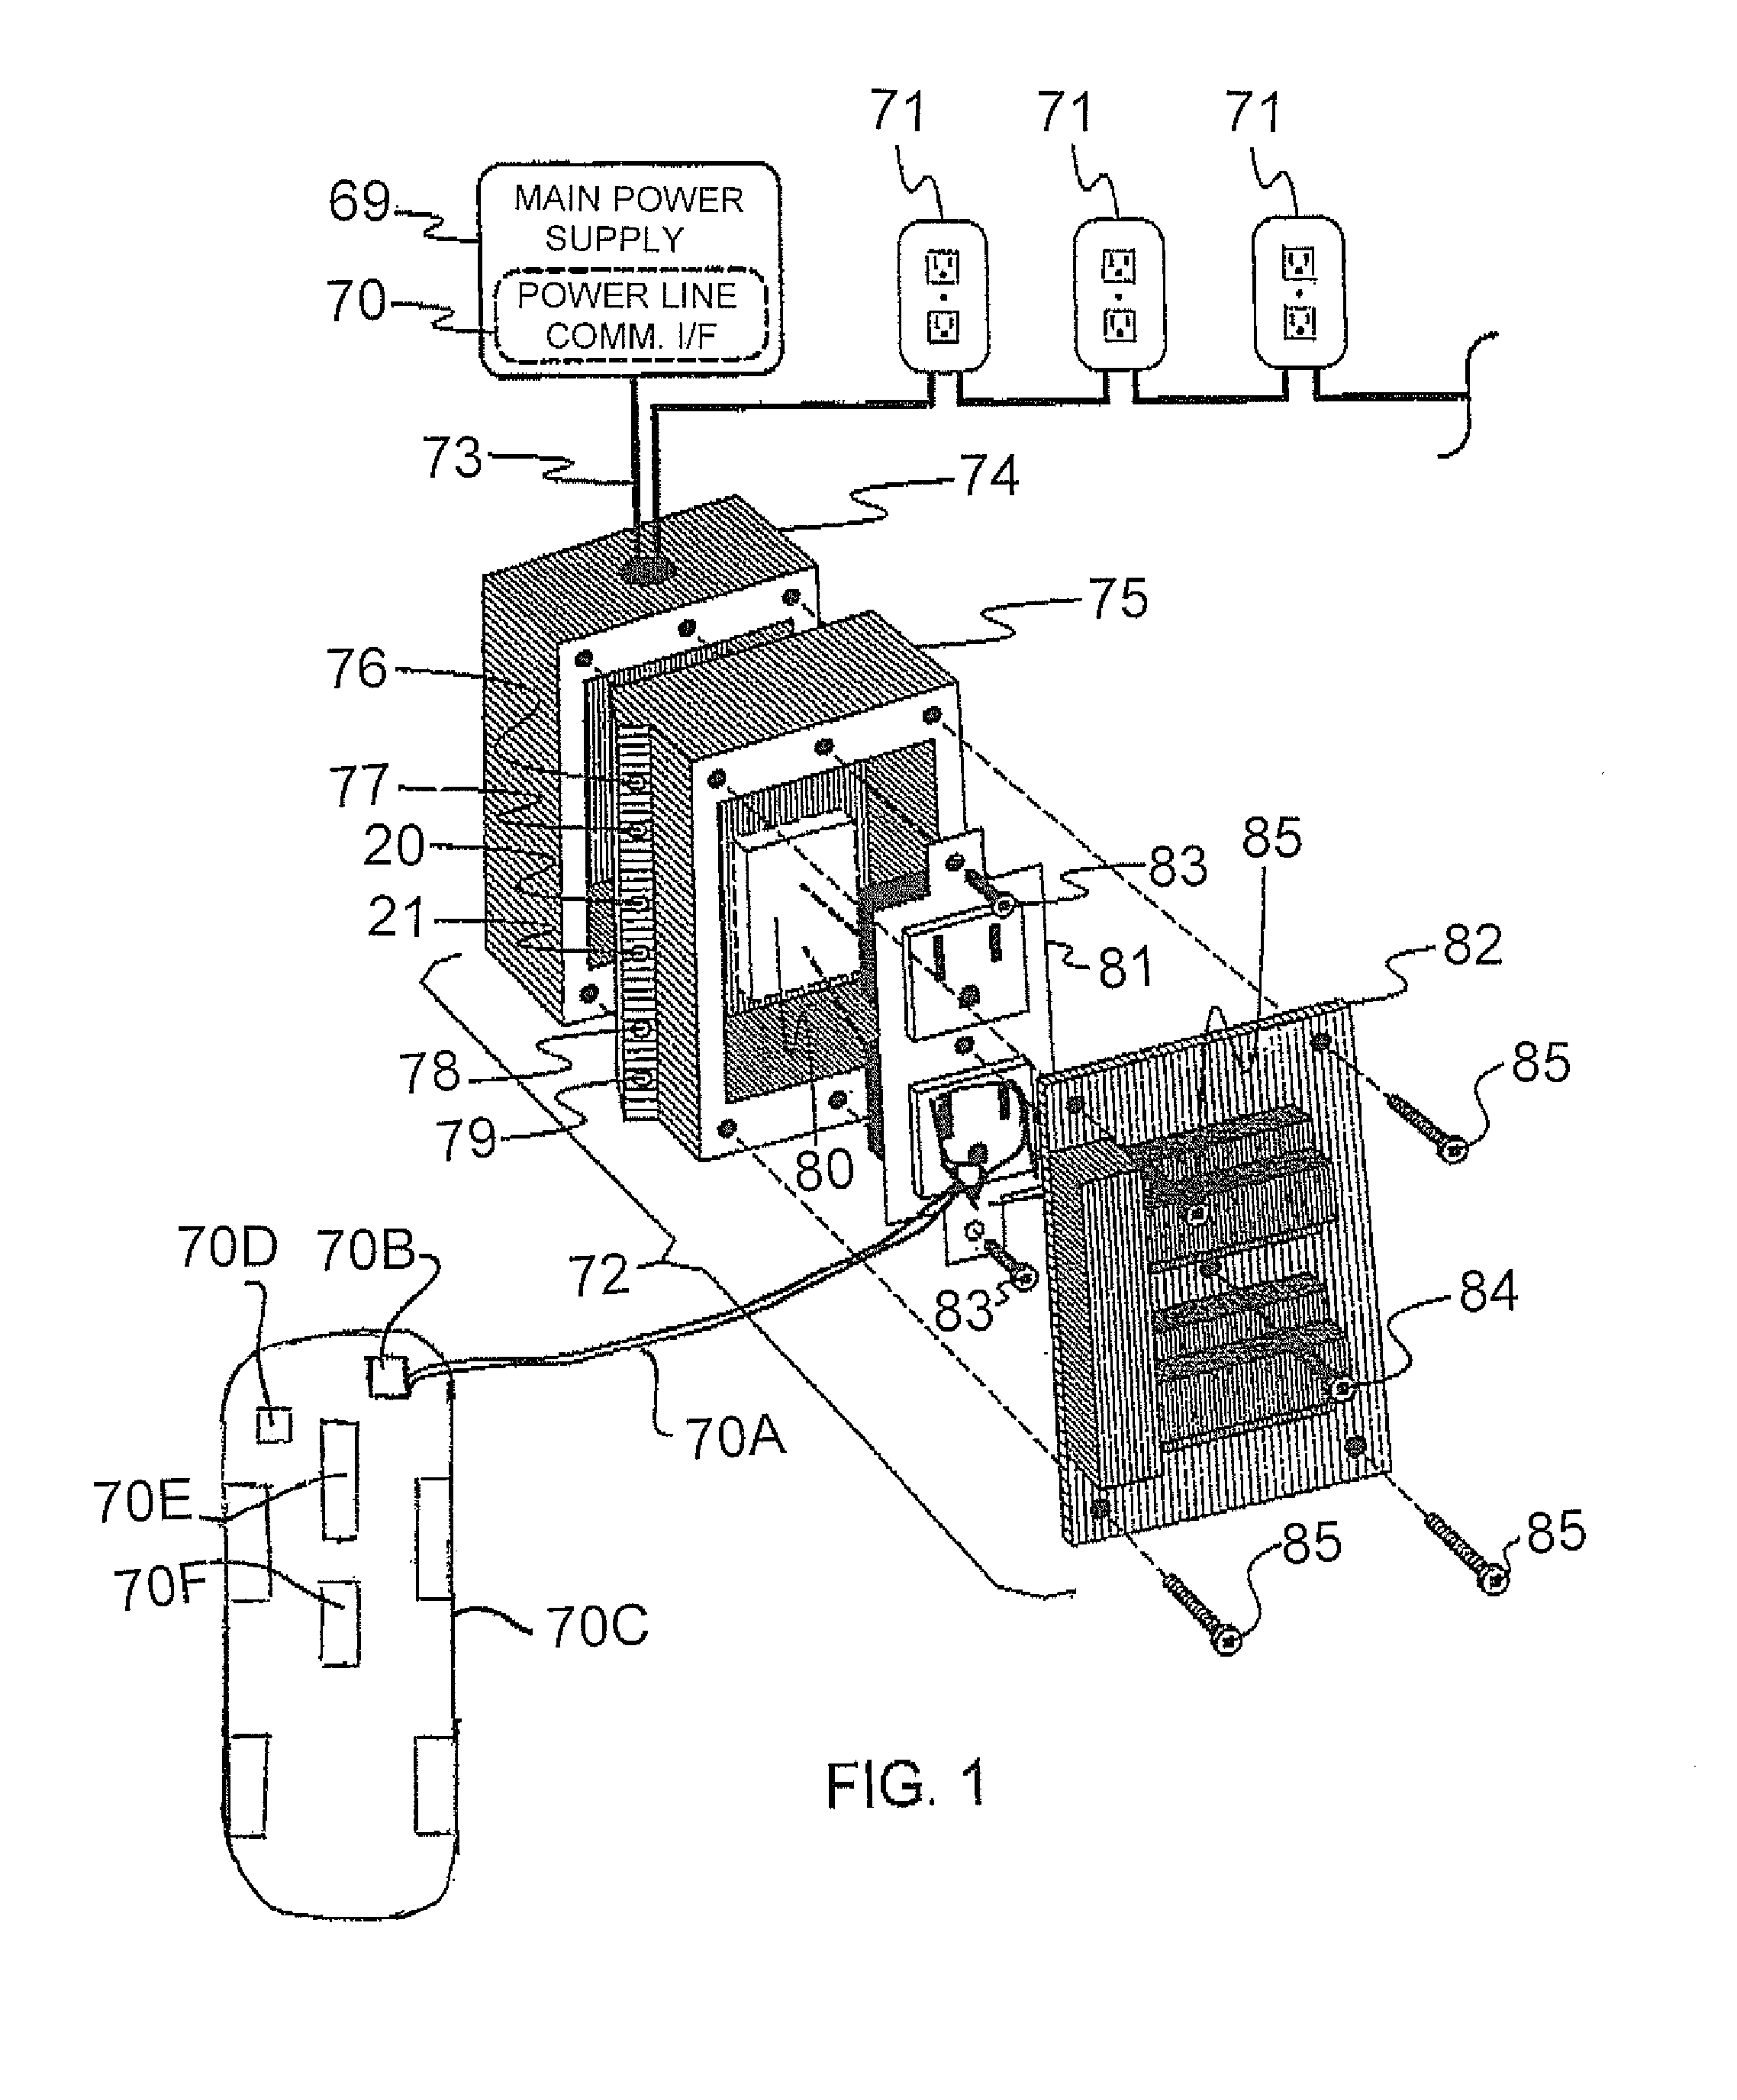 Controlling power supply to vehicles through a  series of electrical outlets